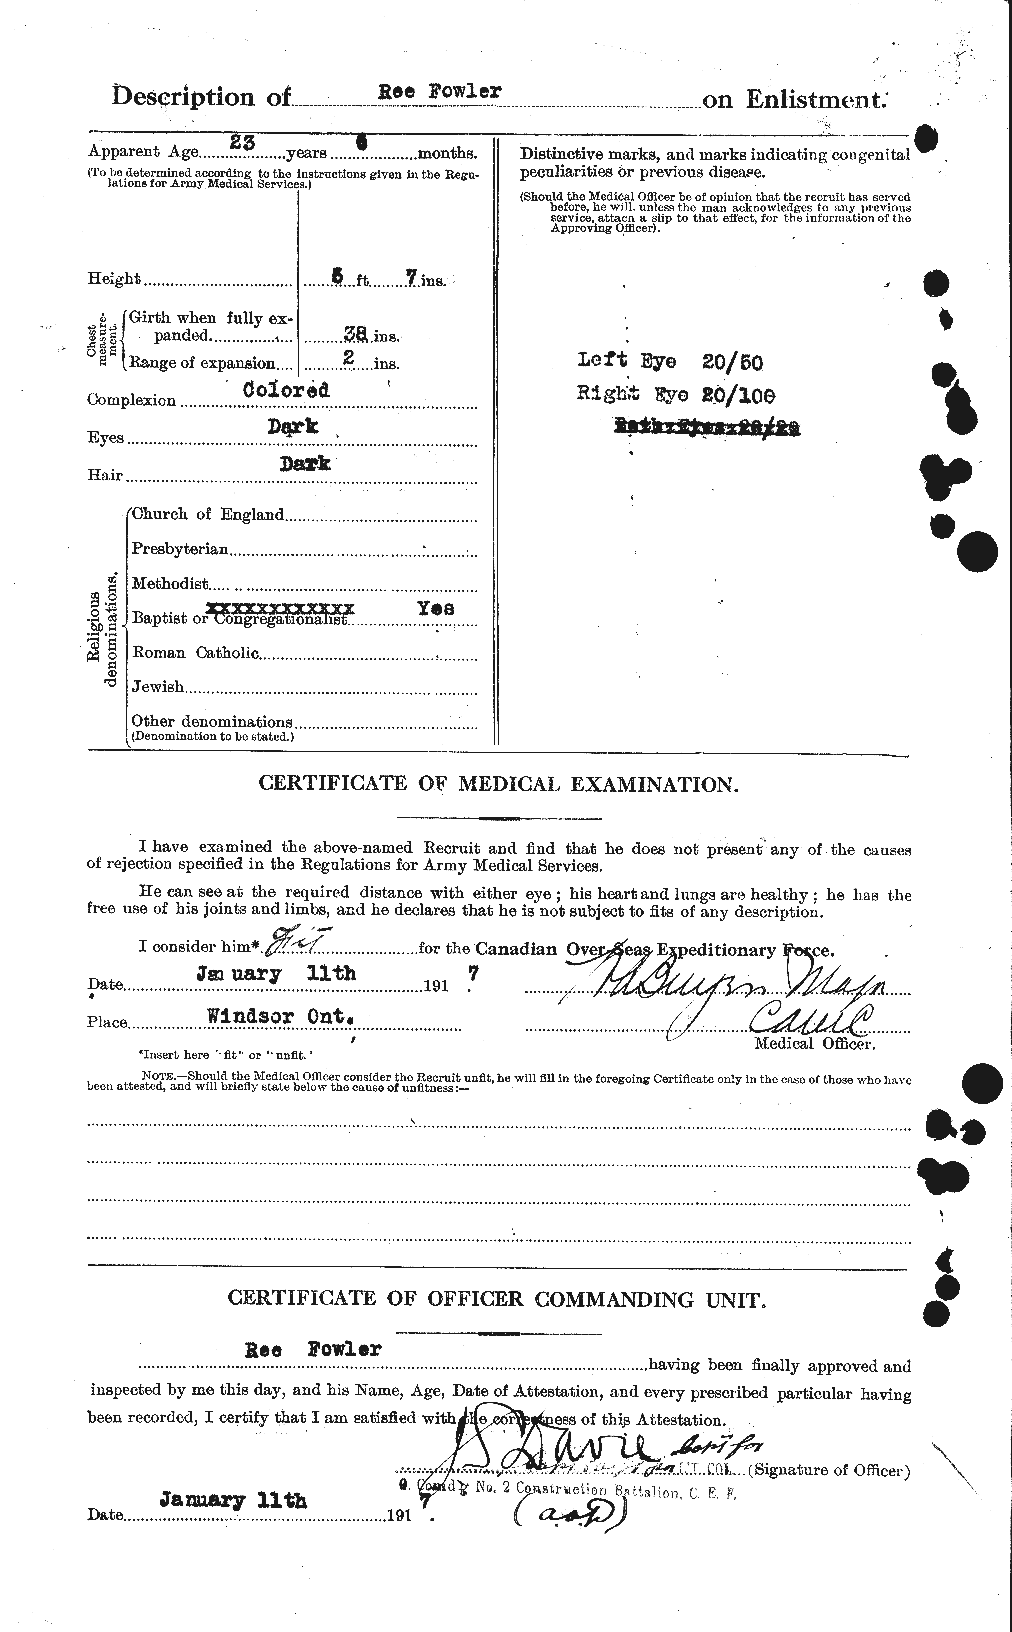 Personnel Records of the First World War - CEF 333156b